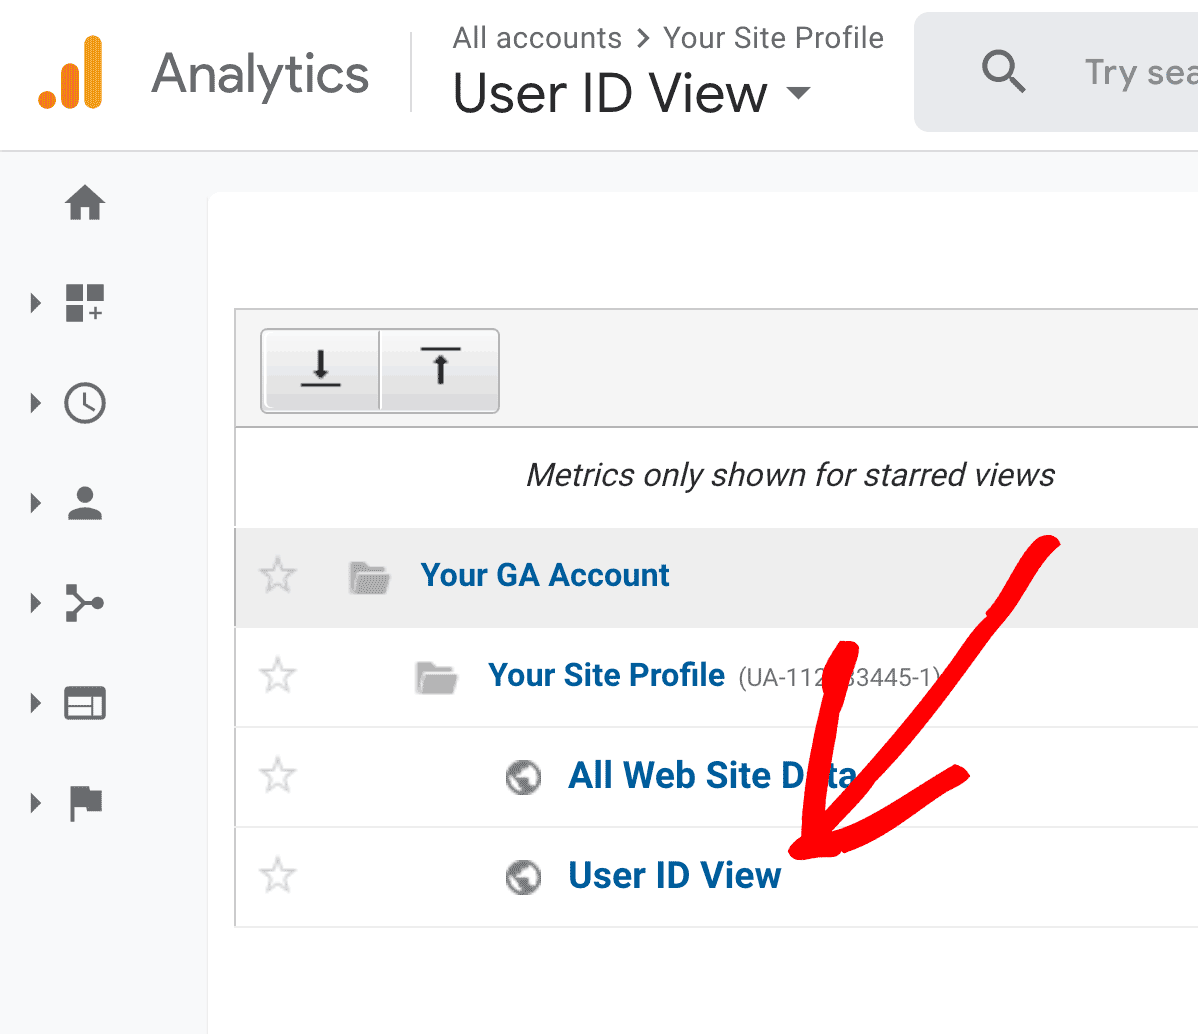 Switch to User ID View